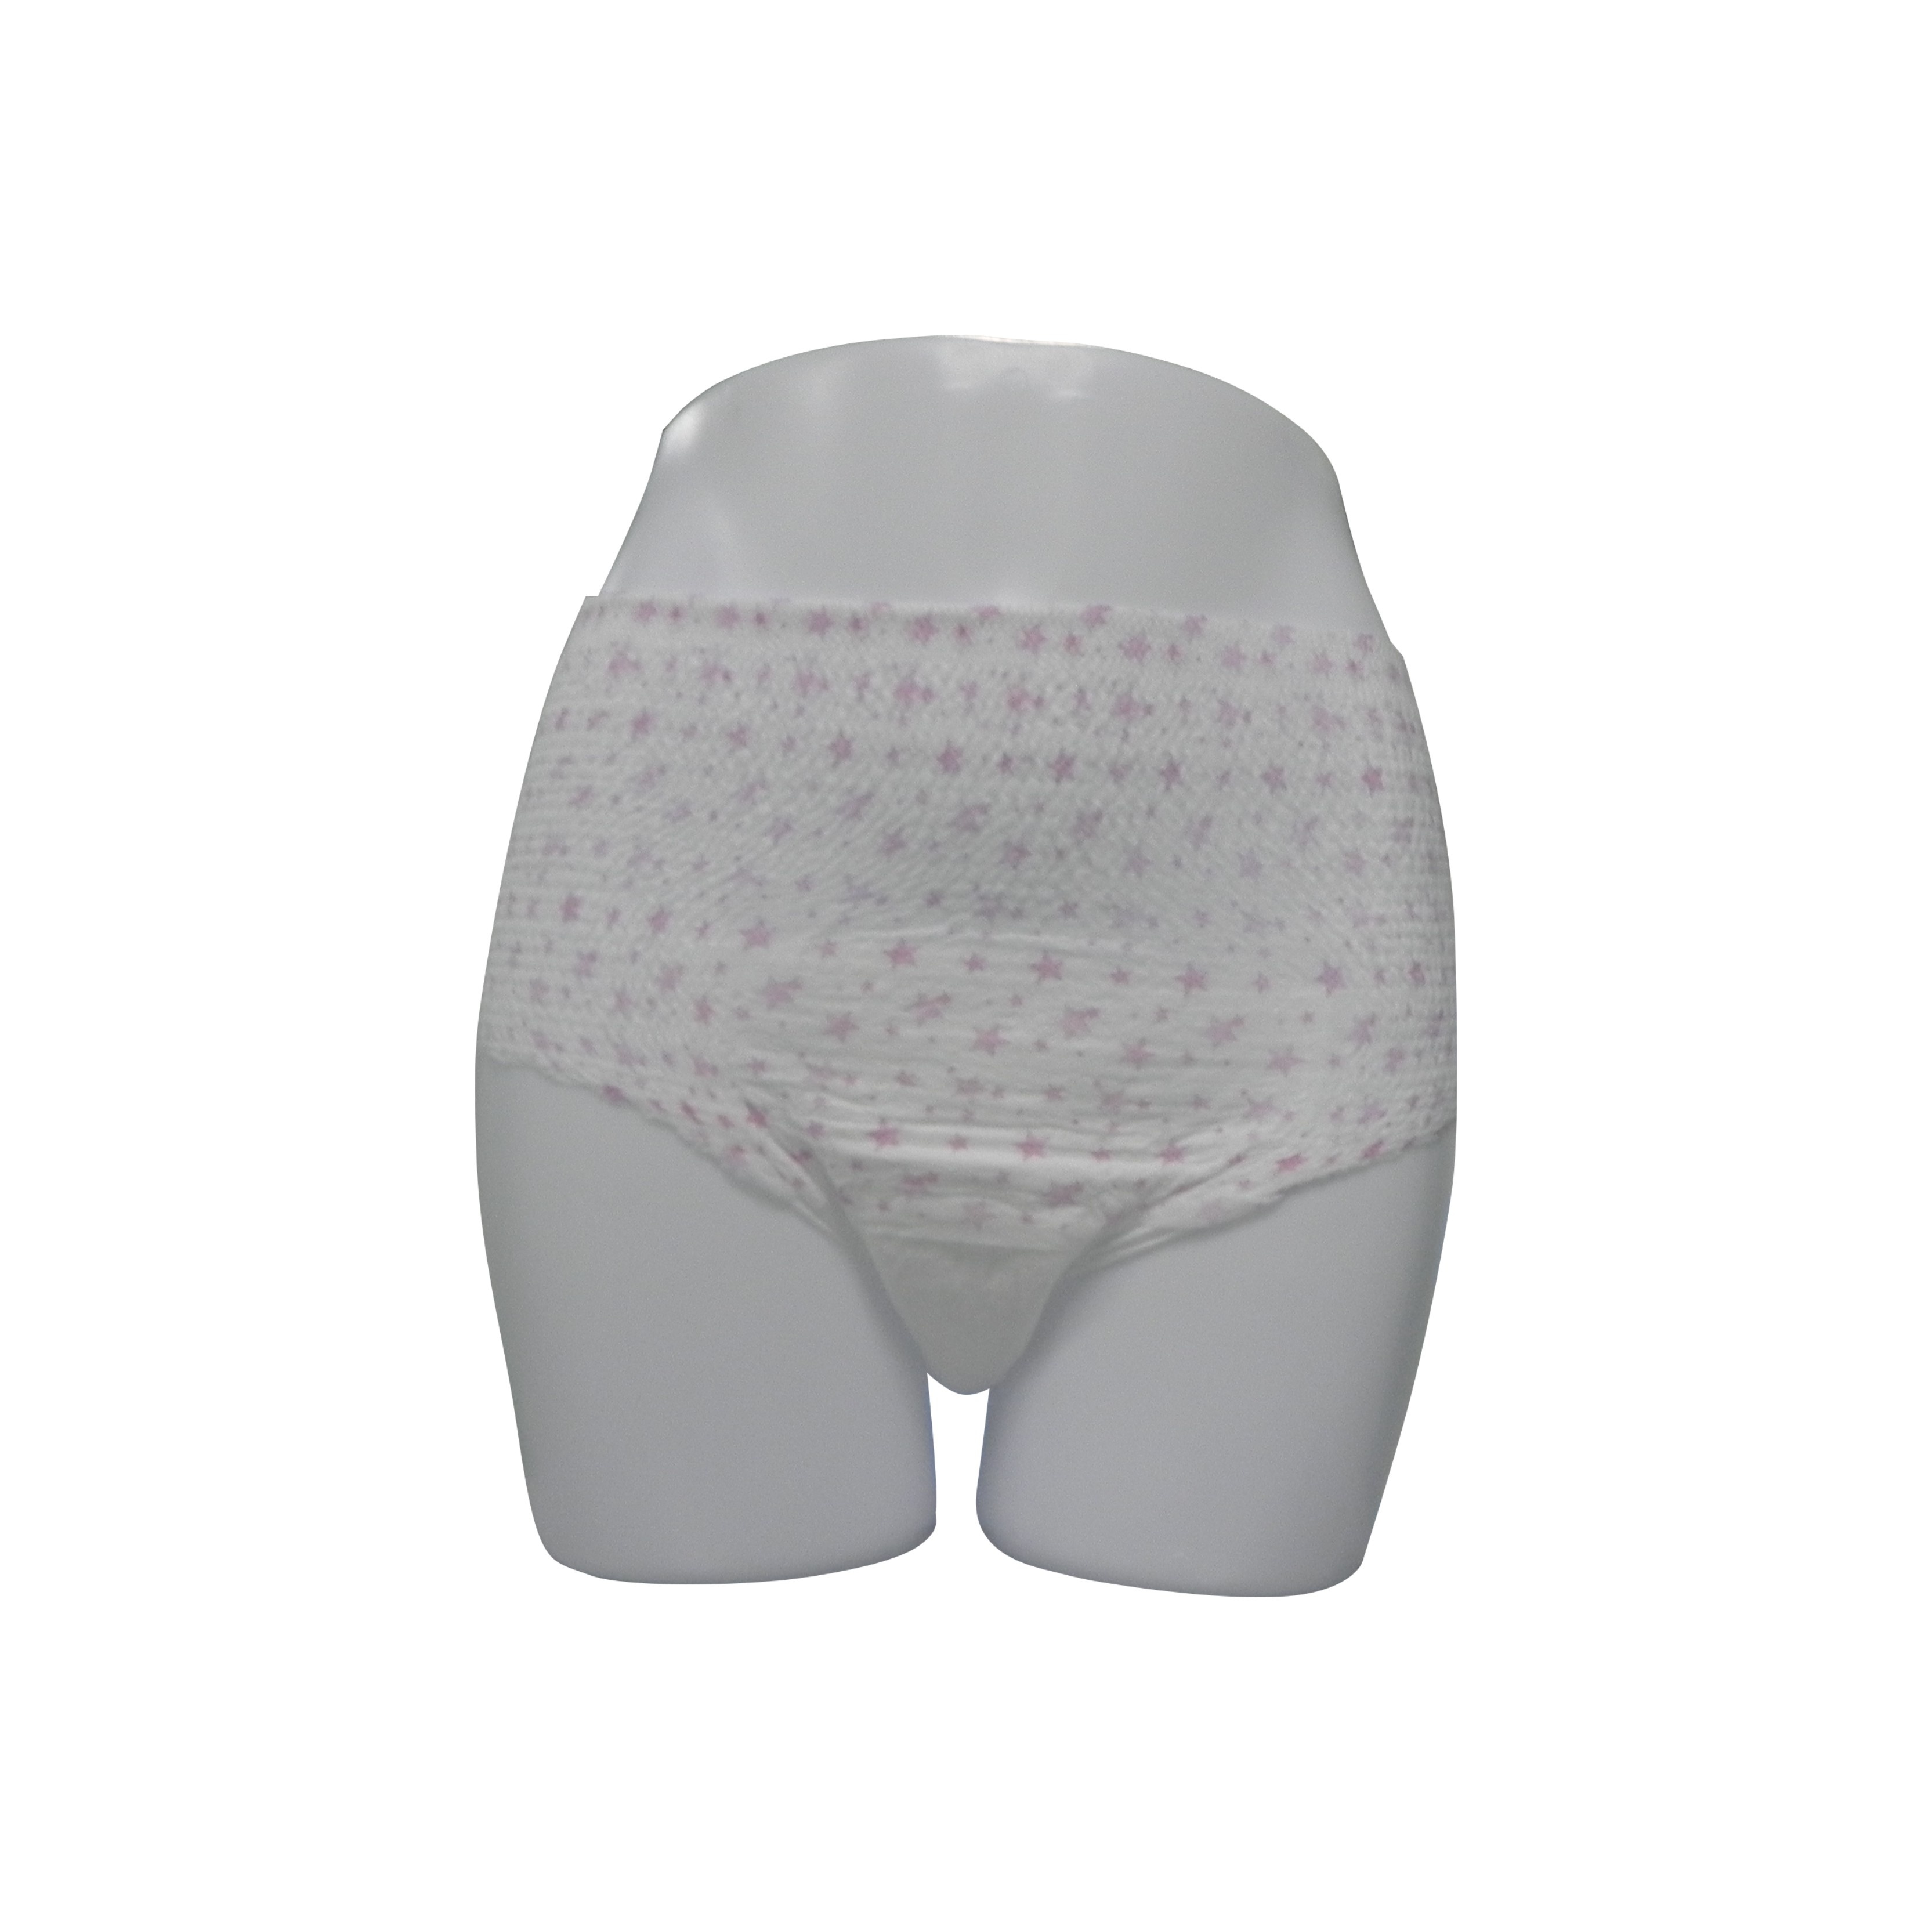 Incontinence underwear for men breathable super thick adult diapers pull up